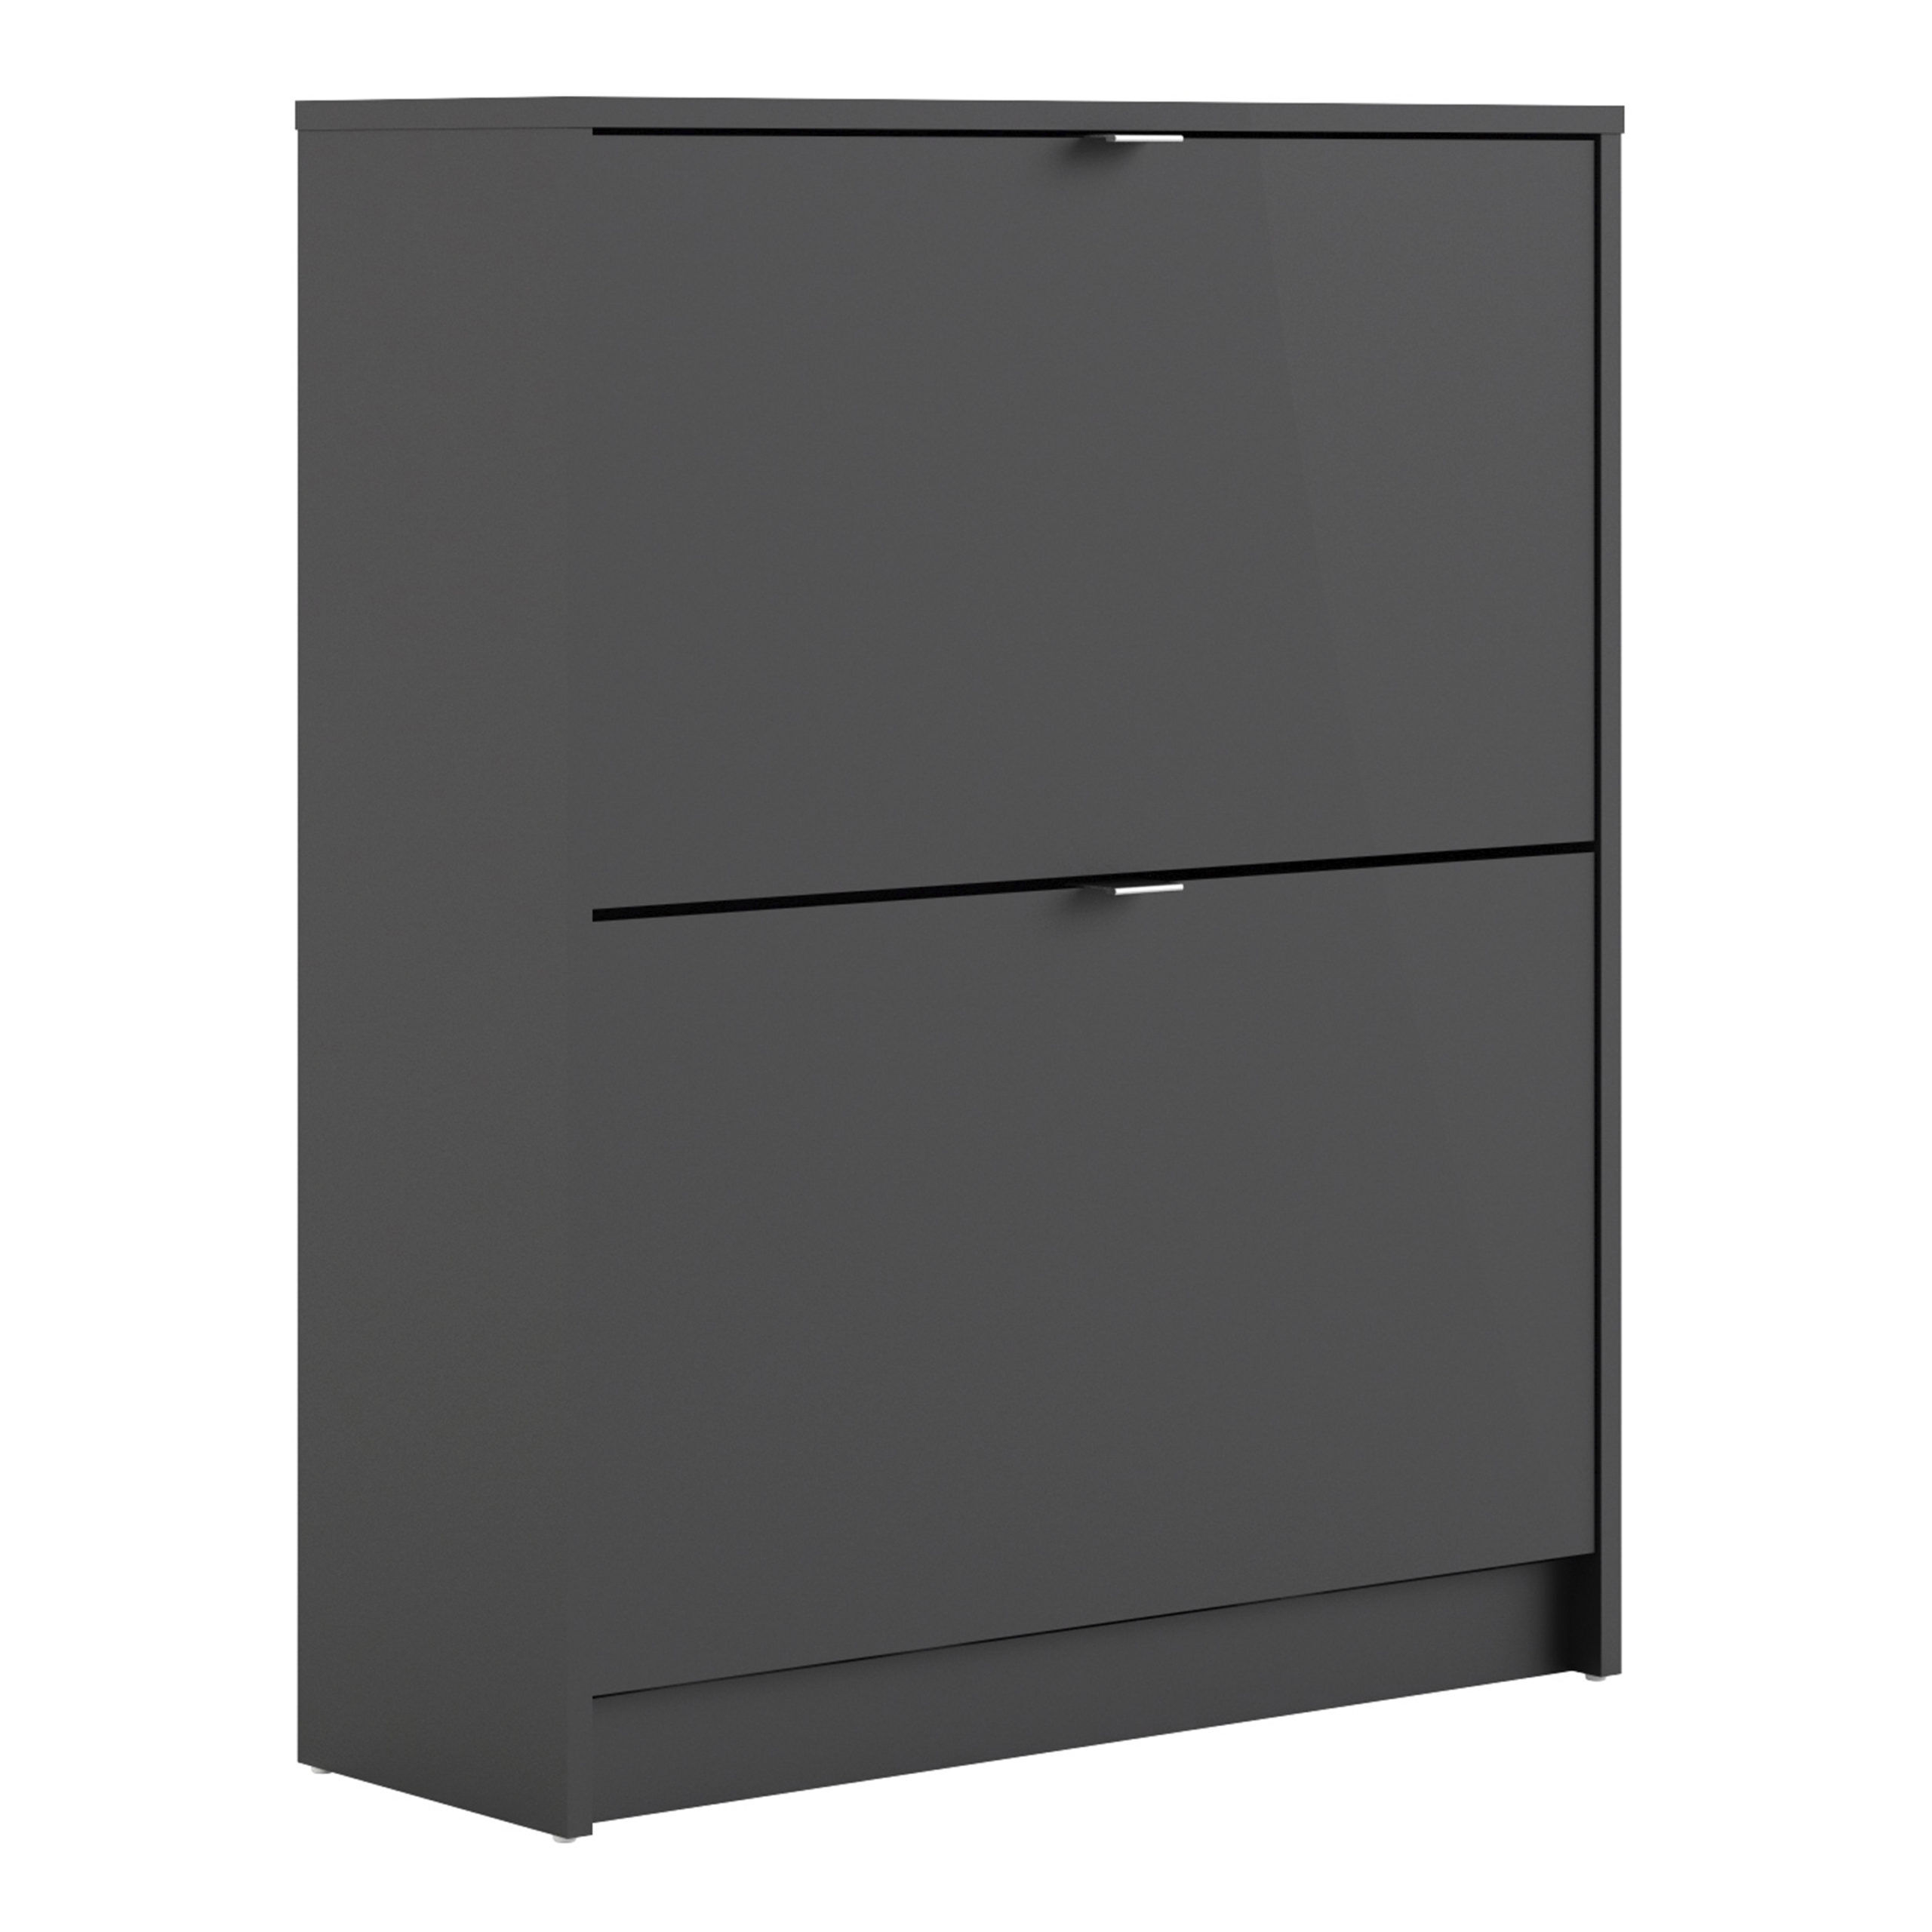 Luxor Shoe Cabinet Collection With 2 Tilting Doors and 2 Layers   Black   Self Assembly